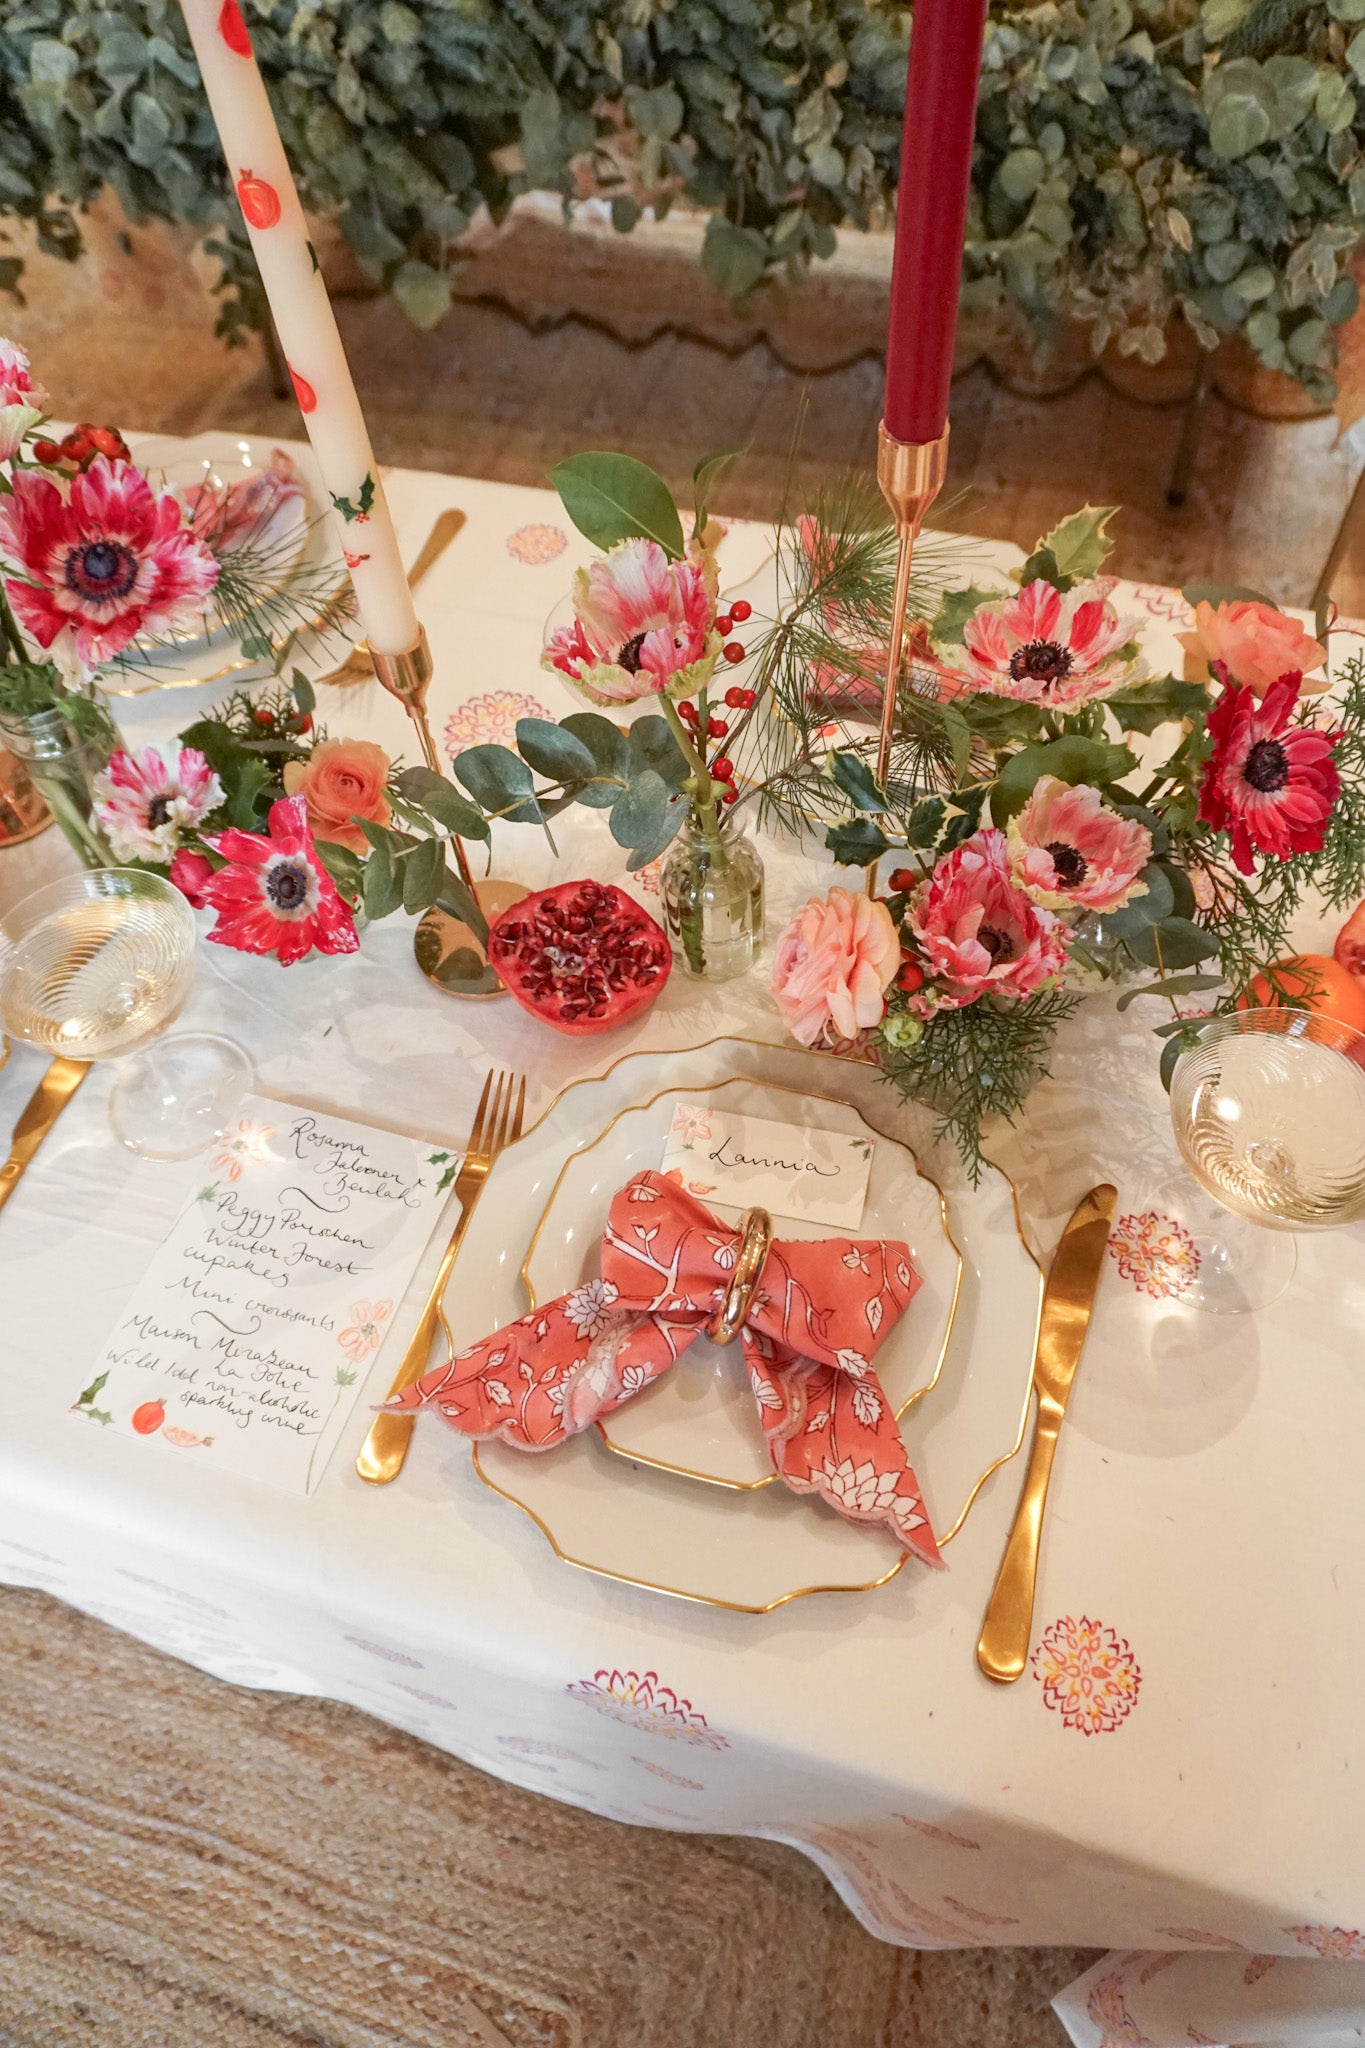 Details of festive tablescape with napkin bow